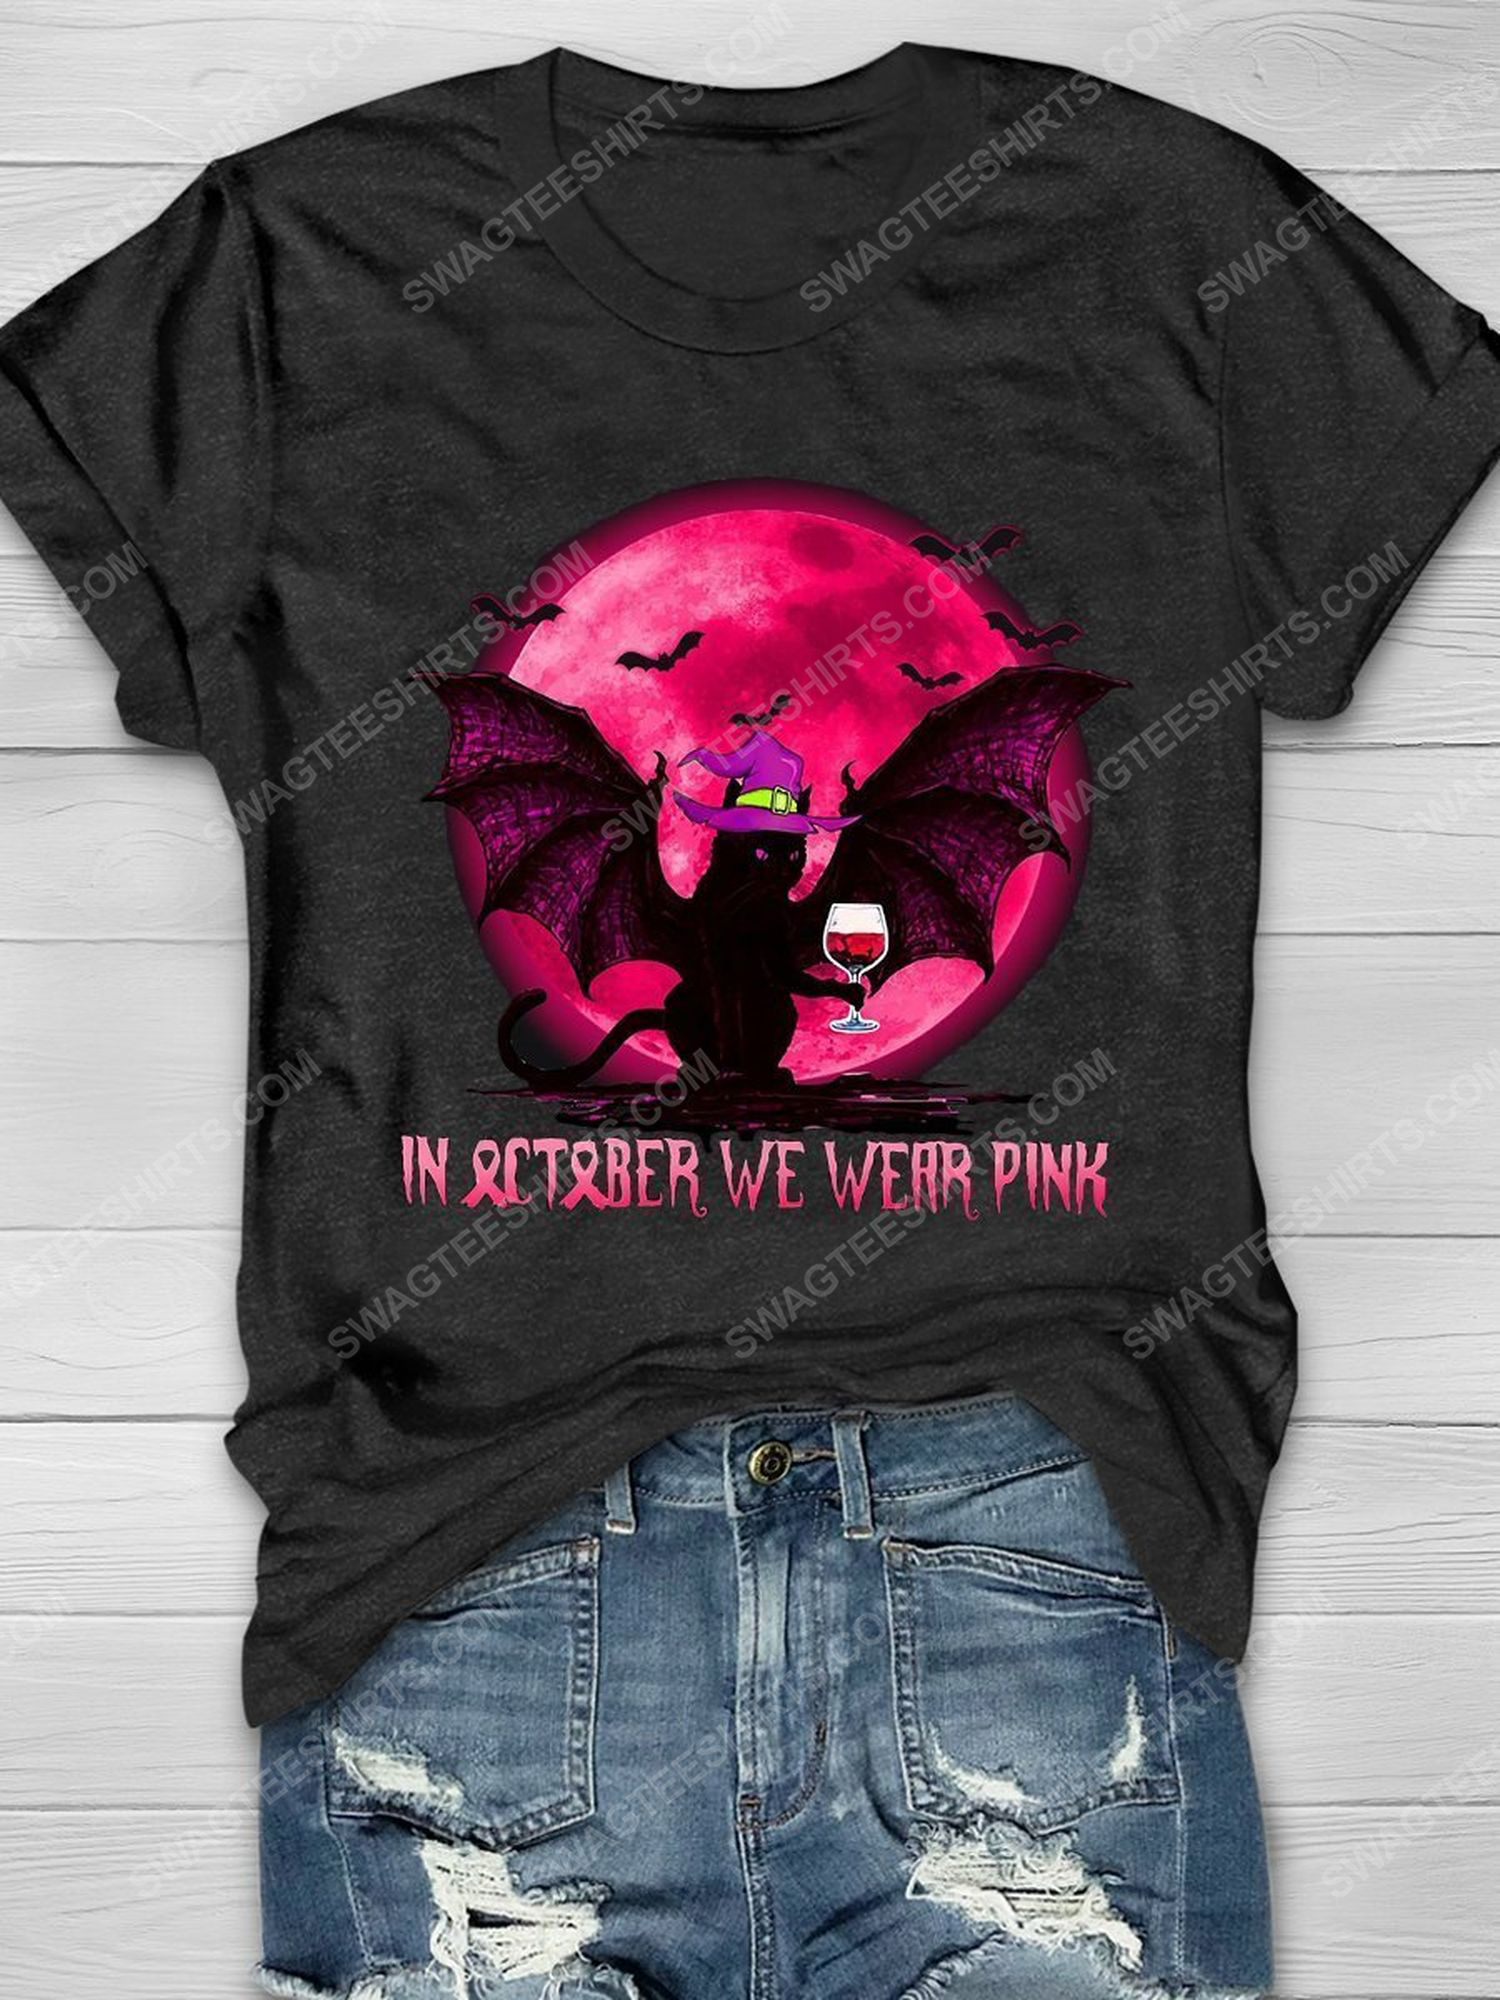 Breast cancer in october we wear pink cat and wine shirt 1 - Copy (3)